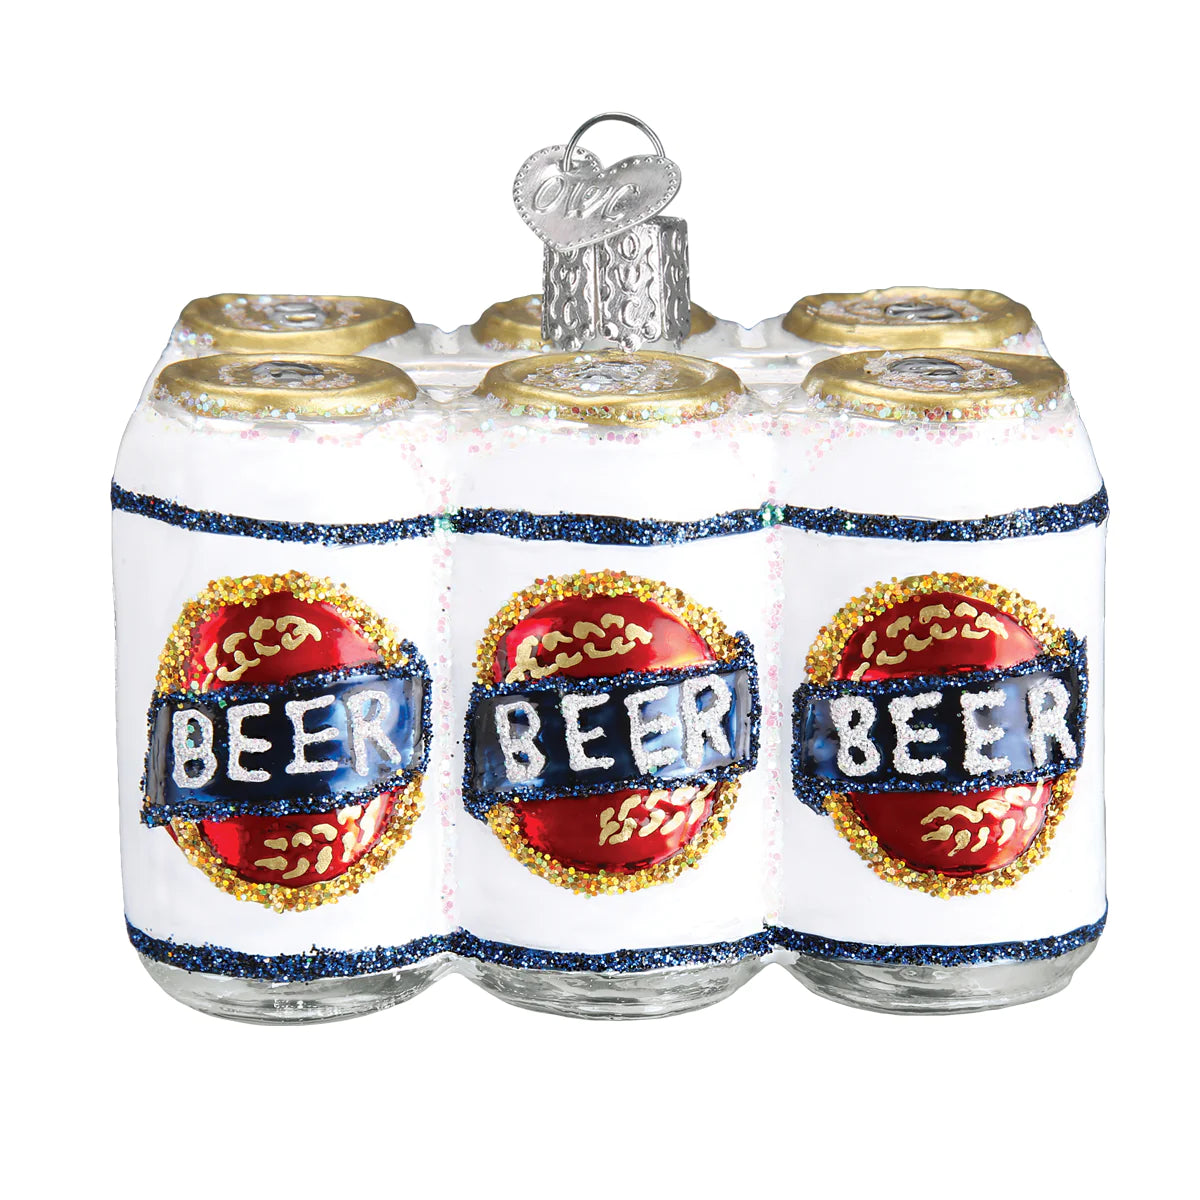 Six Pack Of Beer Ornament  Old World Christmas   